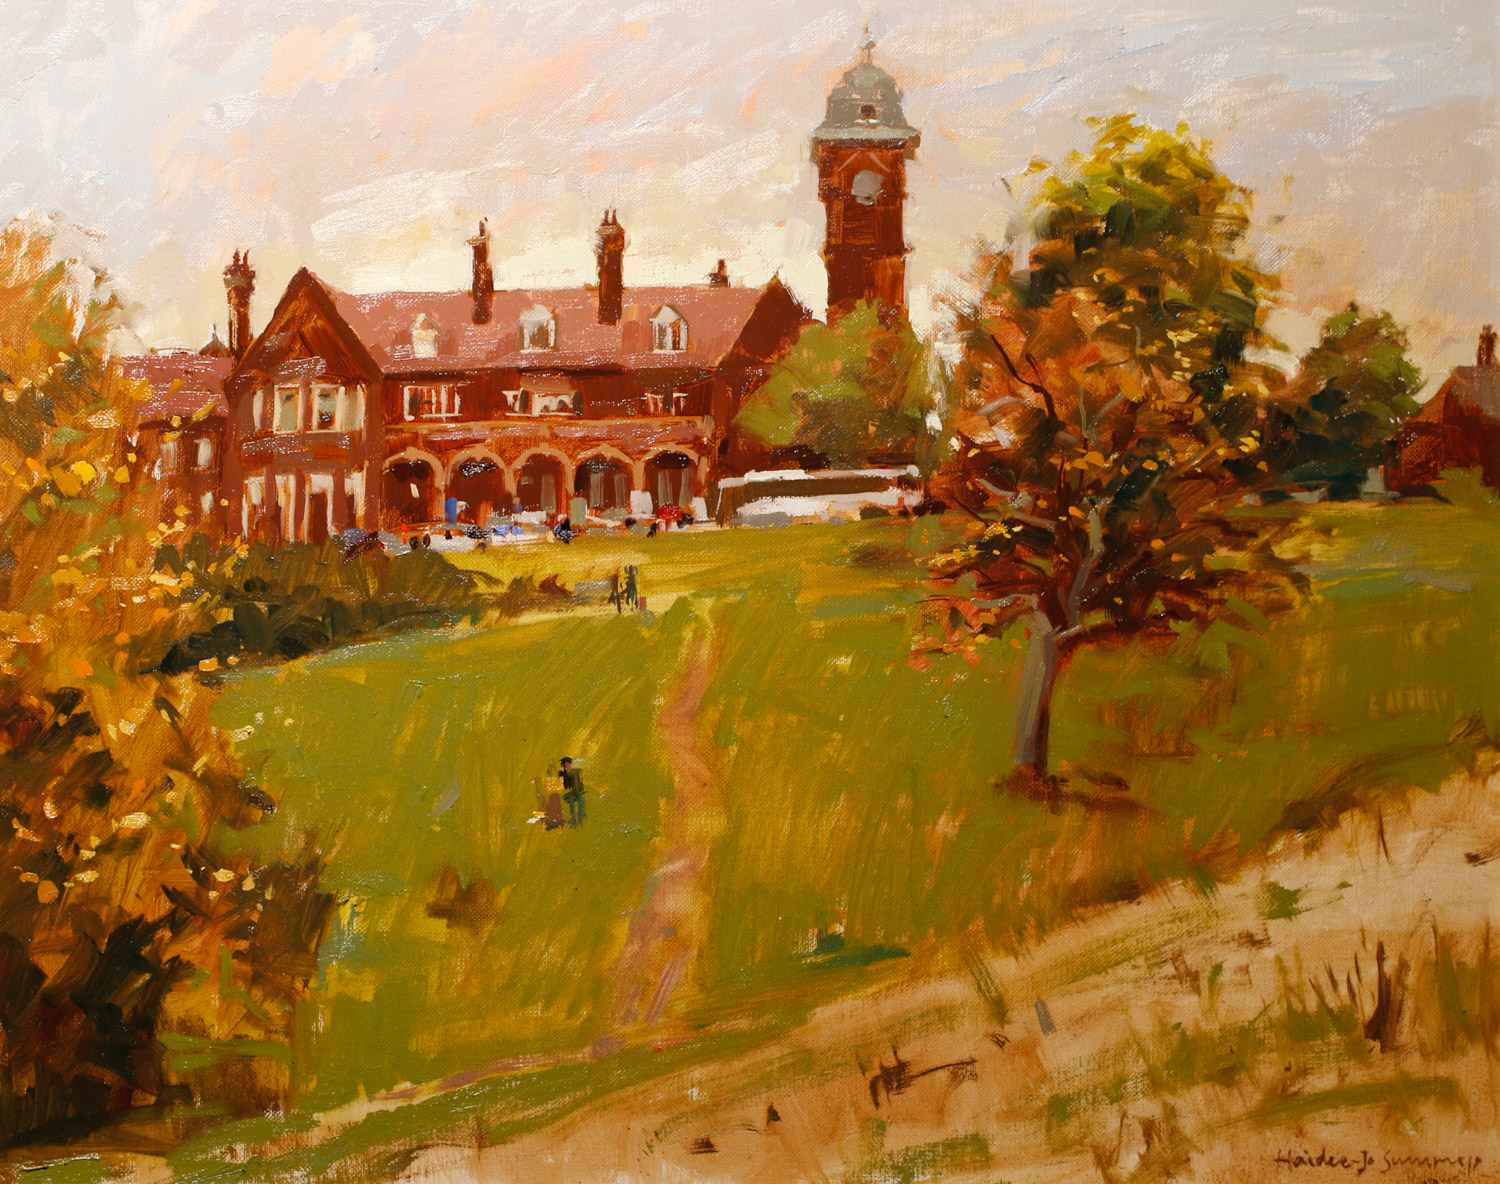 Artist-Haidee-Jo-Summers-Old-Army-Barracks-at-Mousehold-Heath-£850-16x20-Oil-on-Board-at-Paint-Out-Norwich-2015-photo-by-Mark-Ivan-Benfield-6657-1